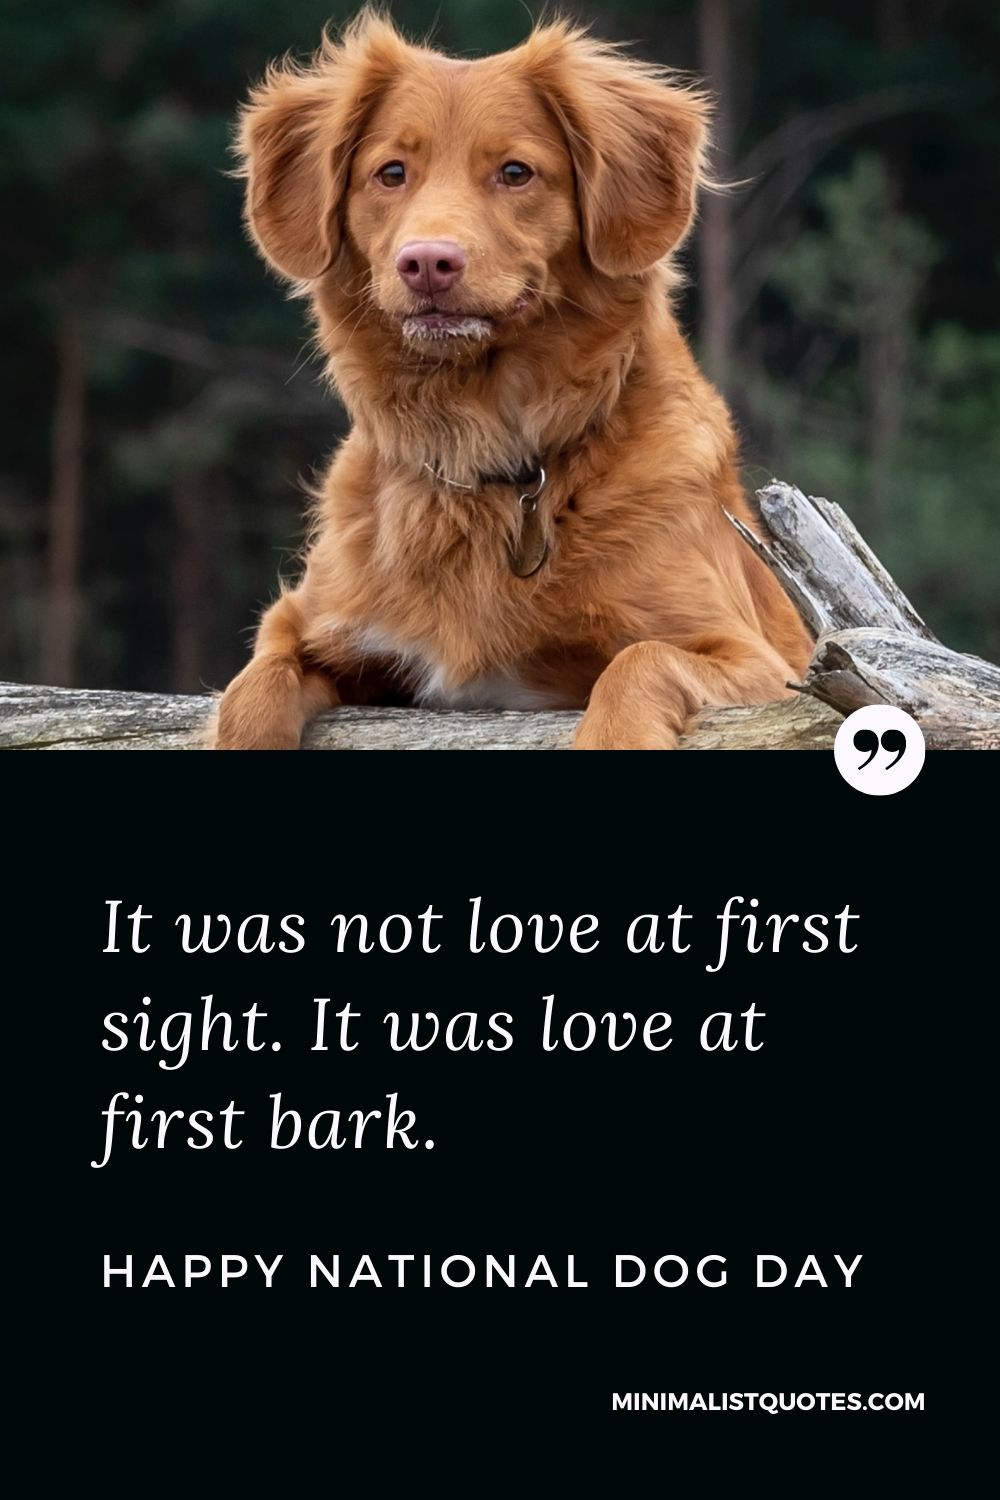 National Dog Day Quote, Wish & Message With Image: It was not love at first sight. It was love at first bark. Happy National Dog Day!